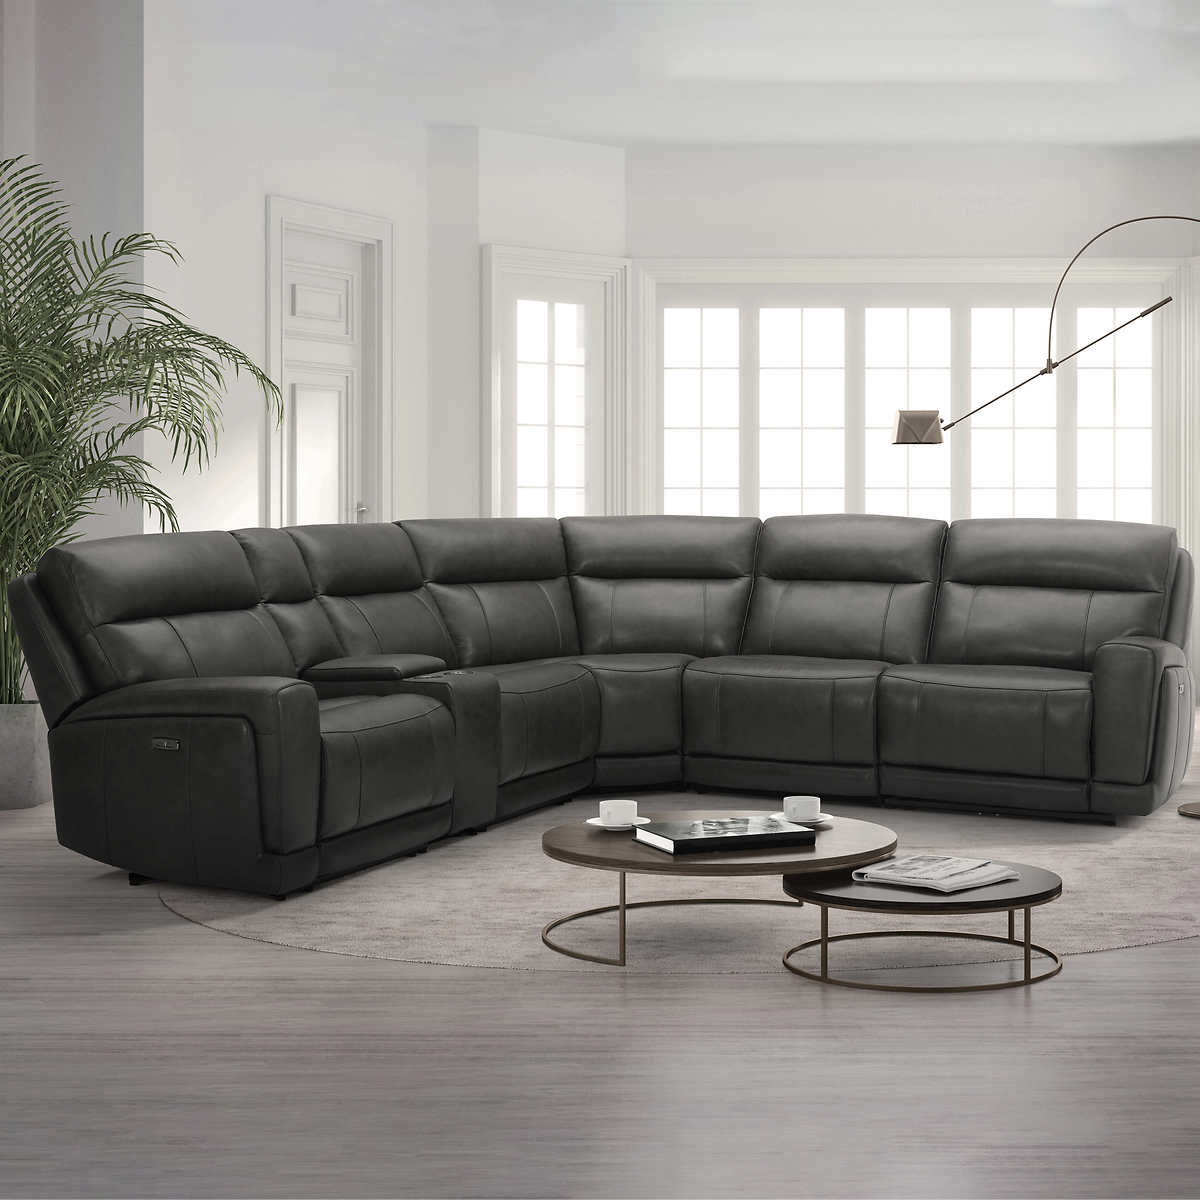 Leather Power Reclining Sectional, Danvors 7 Pc Leather Sectional Sofa With 3 Power Recliners